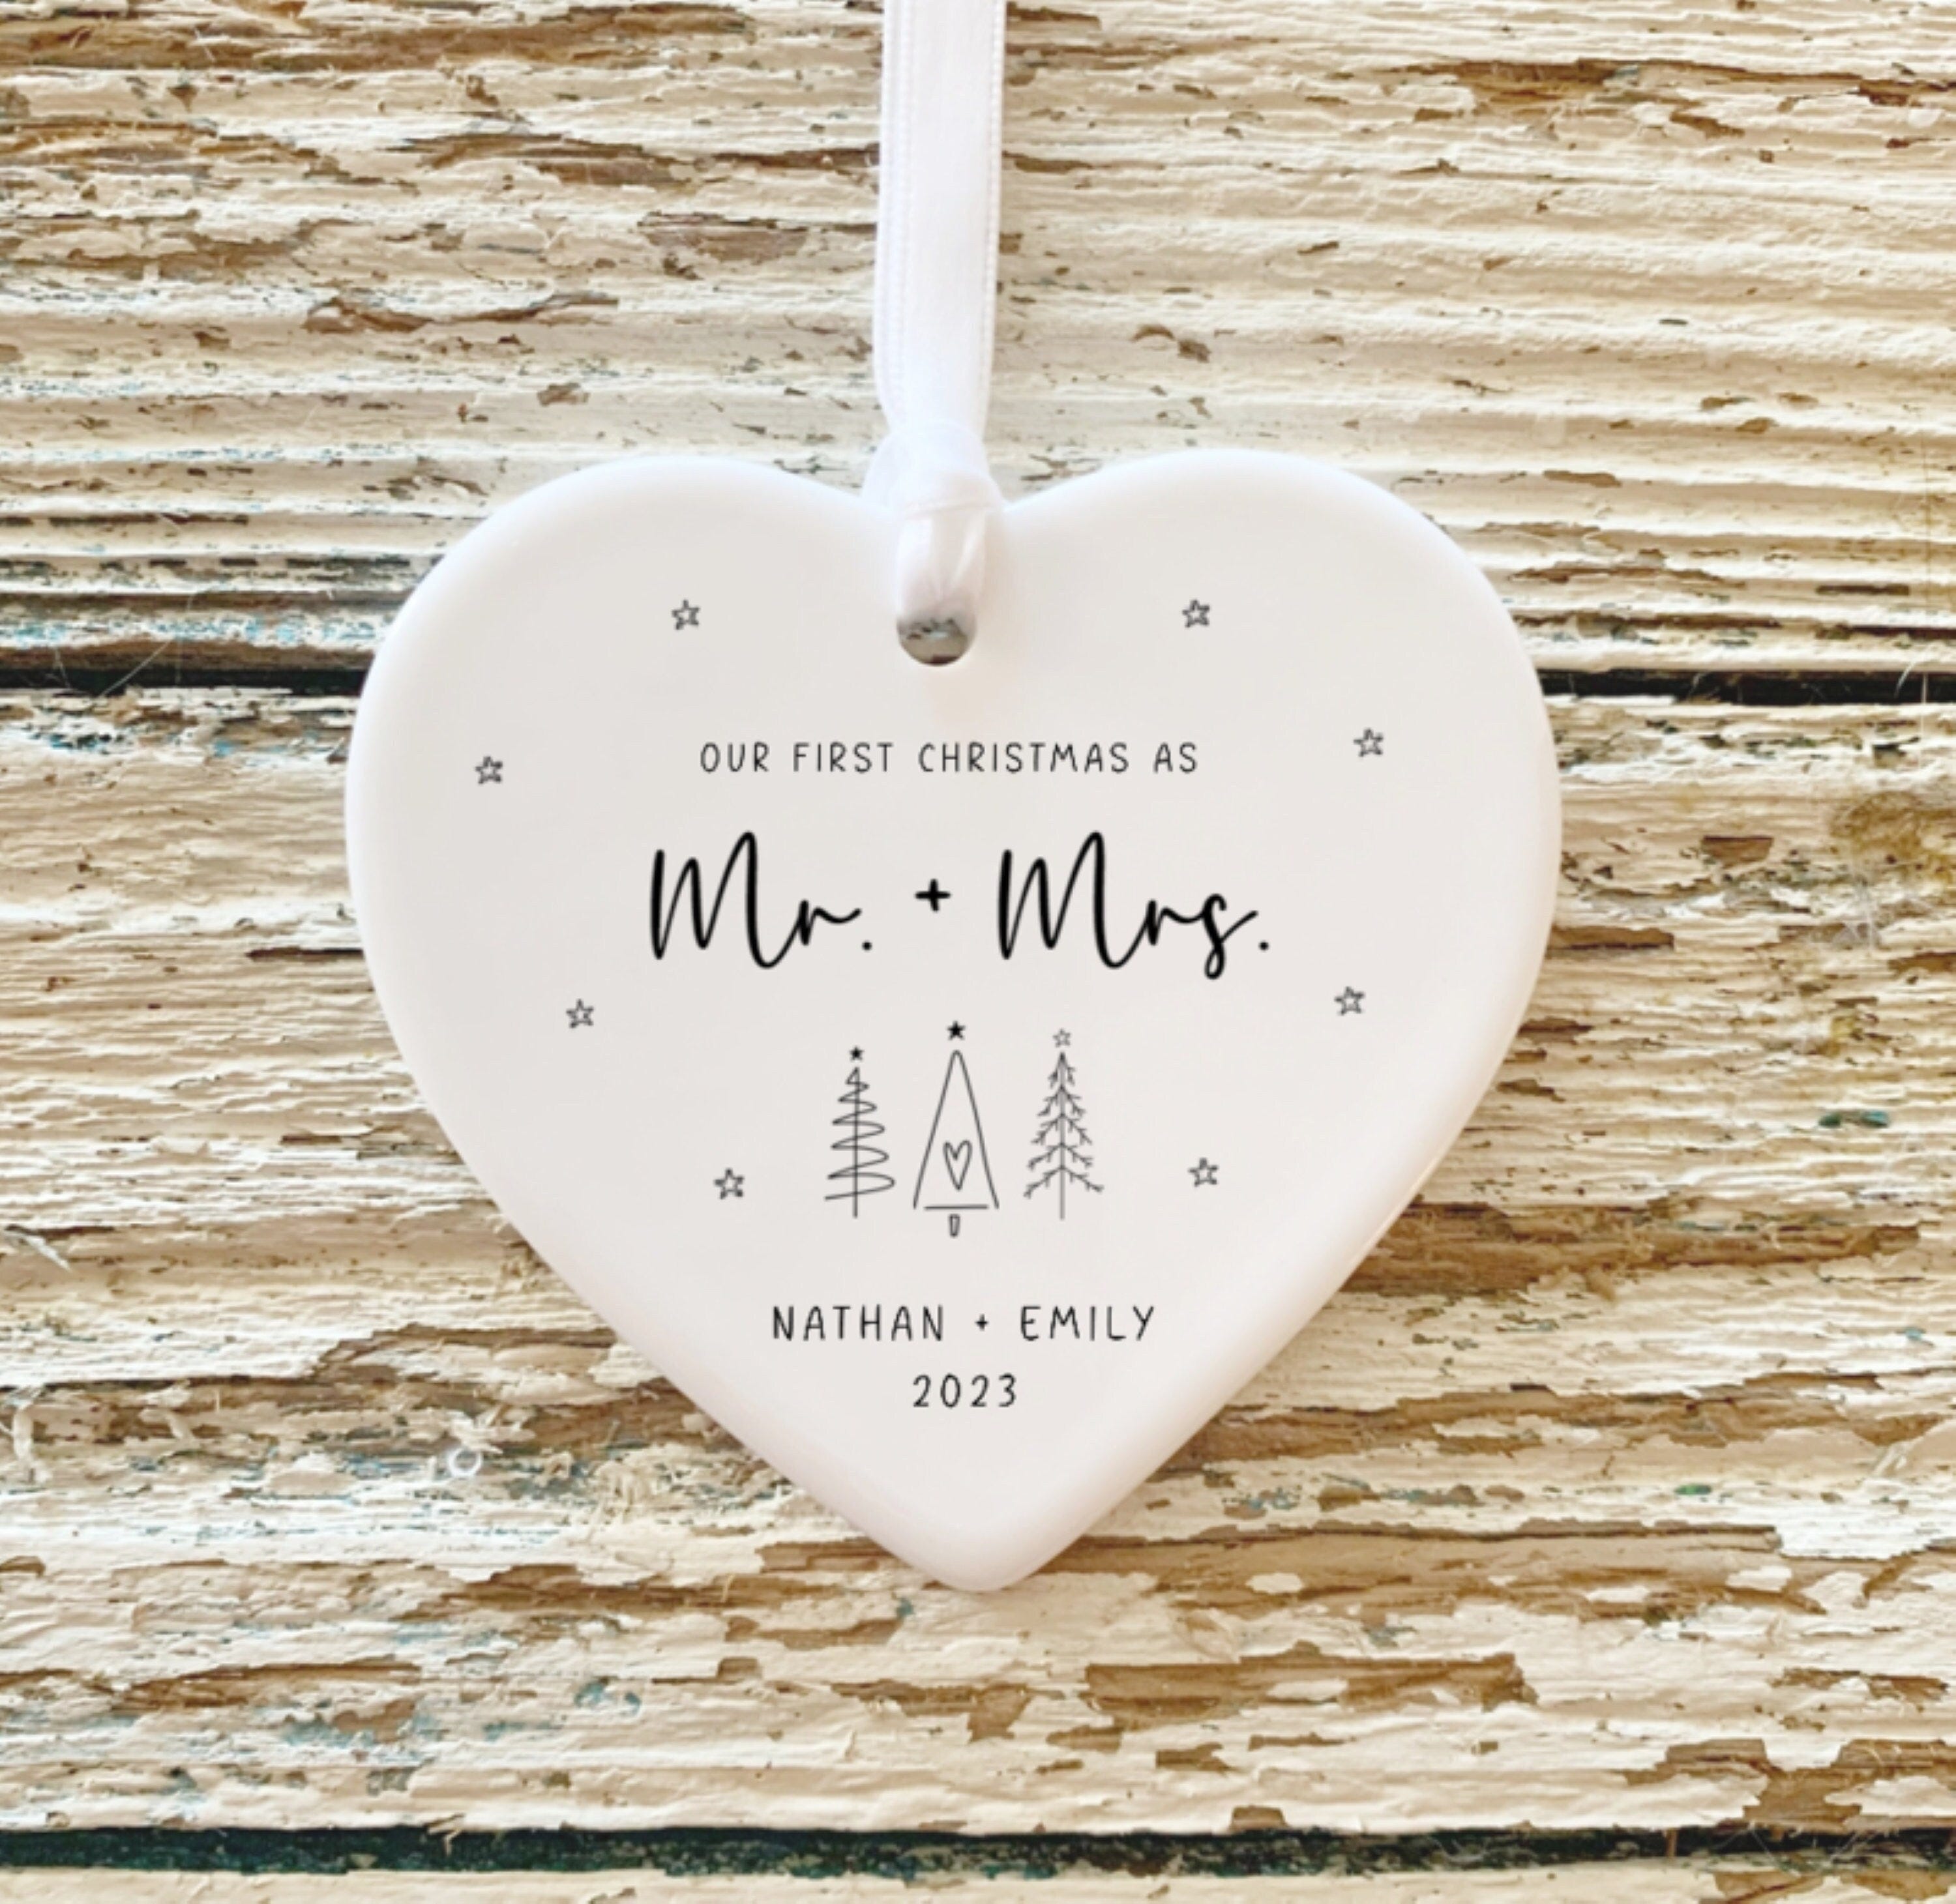 First Christmas Married Ornament | Mr Mrs Ornament | Personalized Wedding Gift | Newlywed Christmas Gift | Our First Christmas Ornament